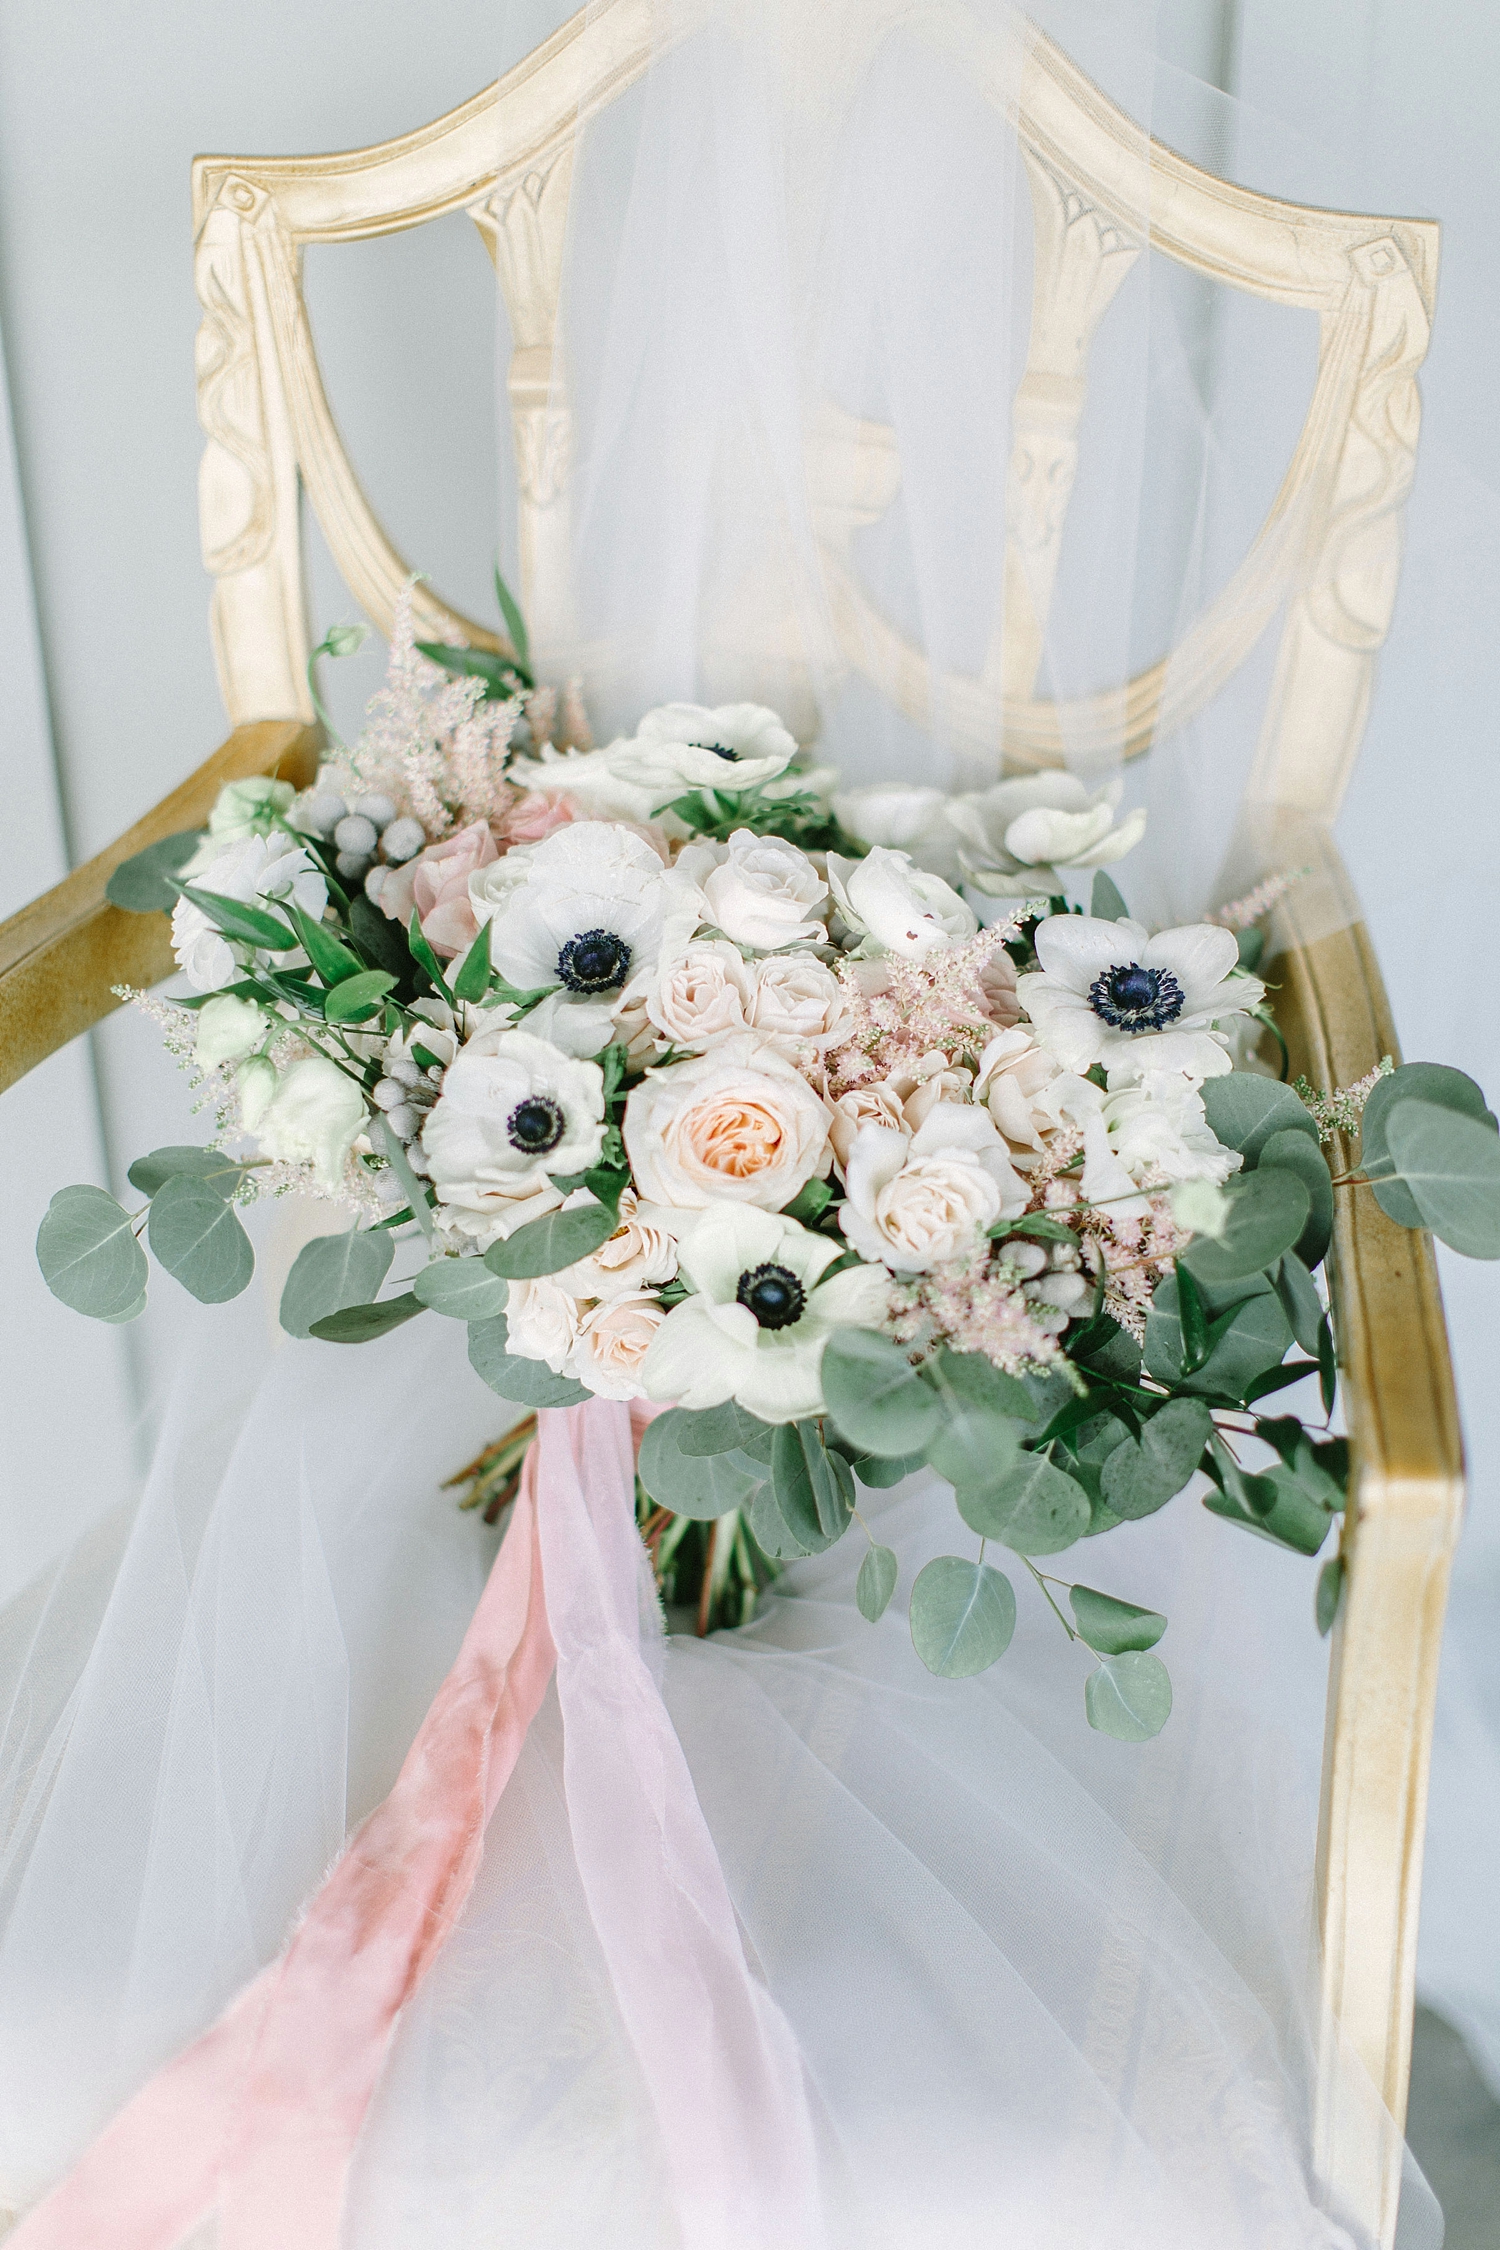 Pale pink and white wedding bouquet with anemones